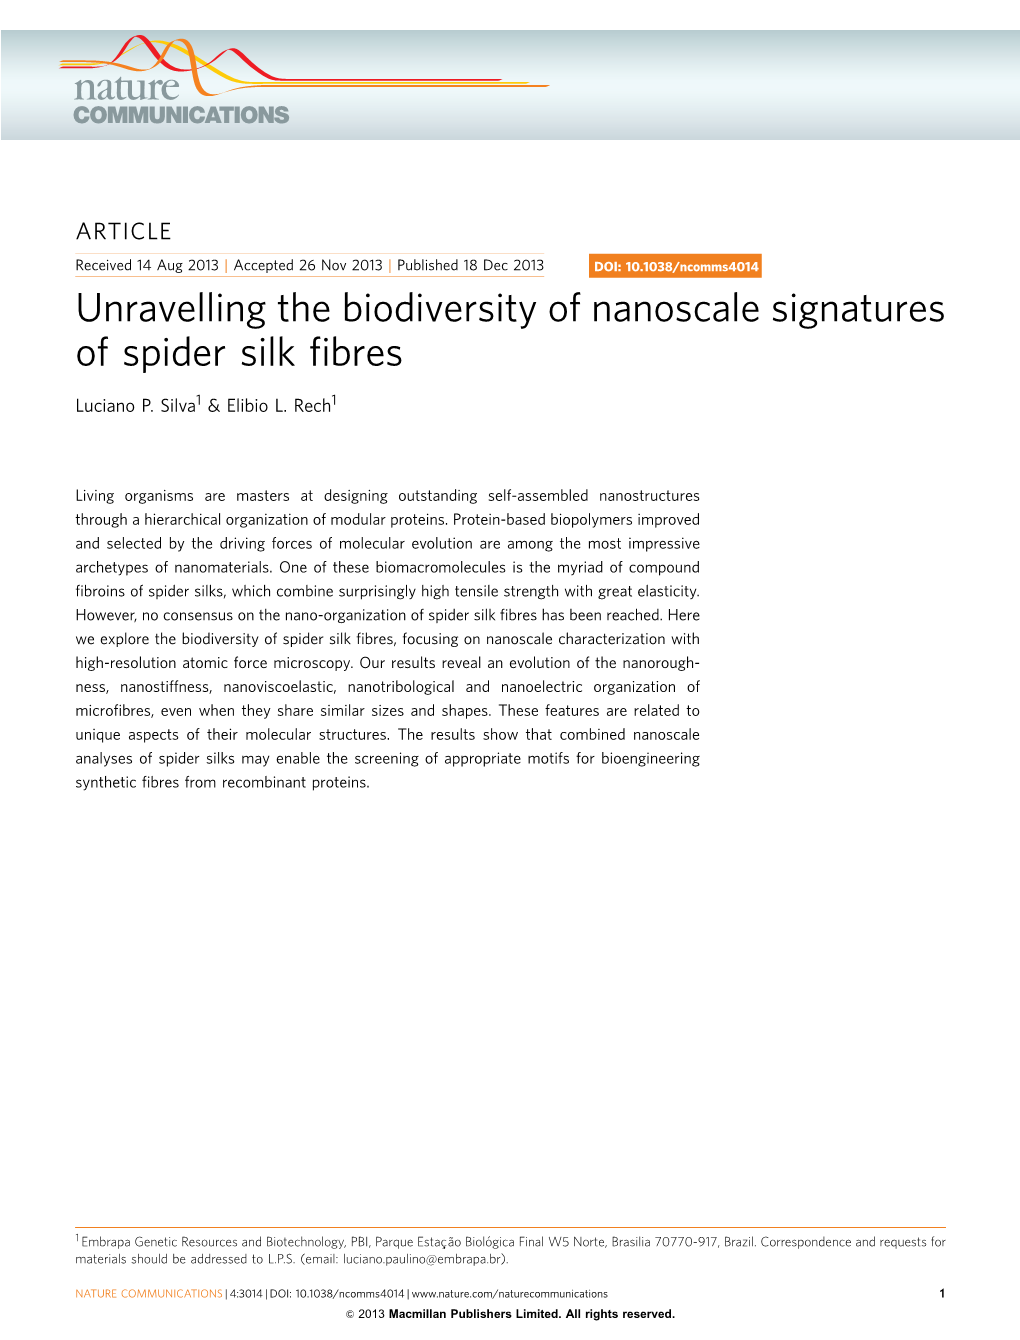 Unravelling the Biodiversity of Nanoscale Signatures of Spider Silk ﬁbres